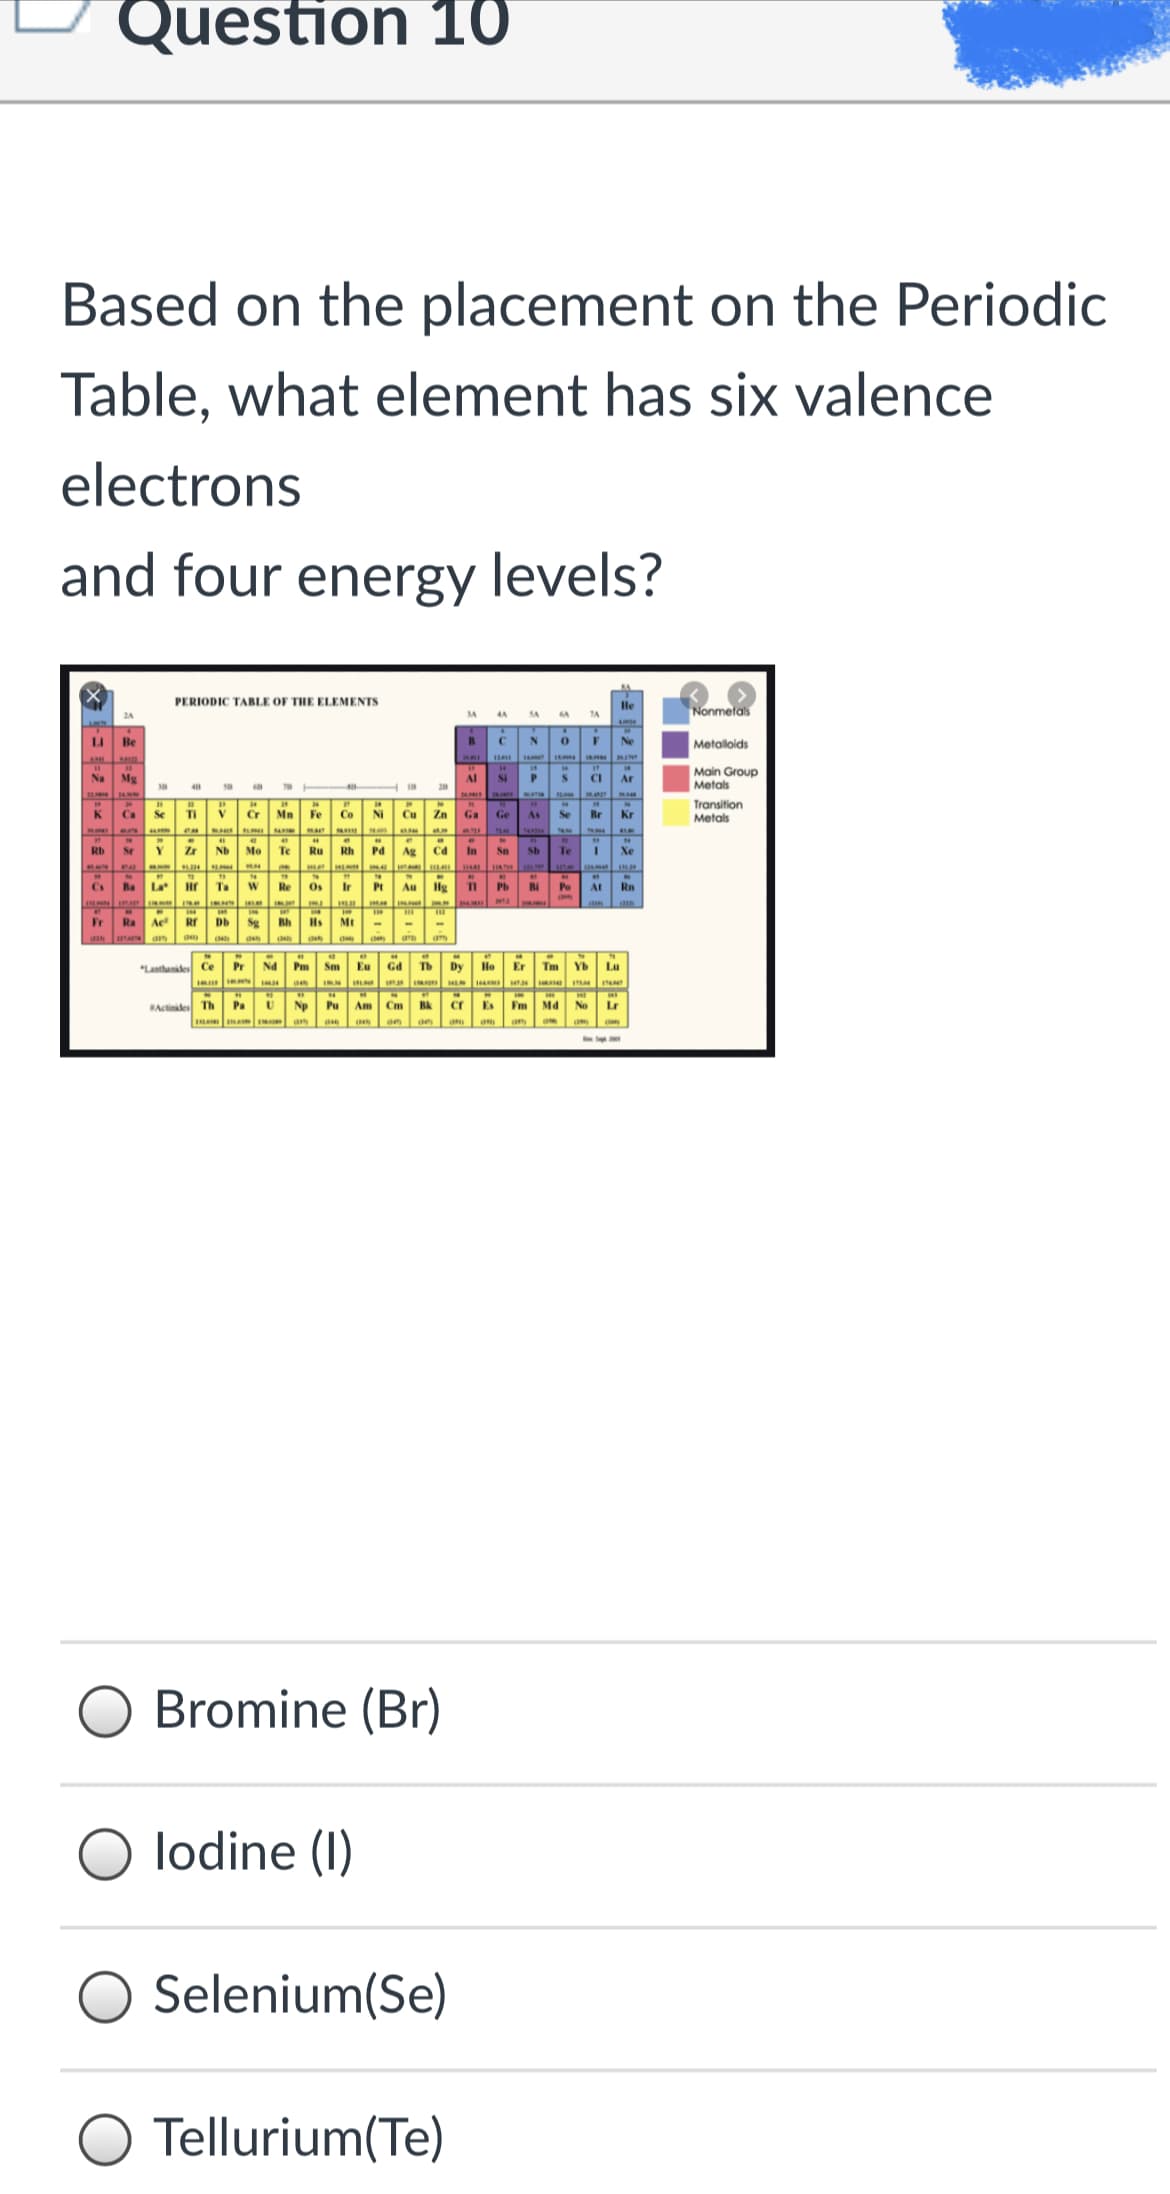 Question 1O
Based on the placement on the Periodic
Table, what element has six valence
electrons
and four energy levels?
PERIODIC TABLE OF THE ELEMENTS
le
Nonmetals
LI
Be
Ne
Metaloids
Main Group
Metals
Na
Mg
Al
Si
CI
Ar
28
Se
Ti
Fe
Co
NI
Transition
Metals
K
Ca
Cr
Mn
Cu
Zn
Ga
Ge
As
Se
Br
Kr
T34
Sr
Y
Zr
Nb
Mo
Te
Ru
Rh
Pd
Ag
In
Sn
Sb
Te
Xe
IN
Ba
La
Ta
W
Re
Os
Ir
Pt
Au
Hg
Pb
Po
At
Rn
Ra
Ae
Db Sg
Bh Hs
Mt
am
*Lanthanides Ce
Pr
A PN
Sm
Eu
Gd
Tb
Dy
Ho
Er
Tm
Yb
Lu
INM
Actinides Th Pa
Np
Pu Am Cm
Bk
Es
Fm
Md
No
Lr
IA a an ae (1
Bromine (Br)
lodine (I)
Selenium(Se)
Tellurium(Te)
